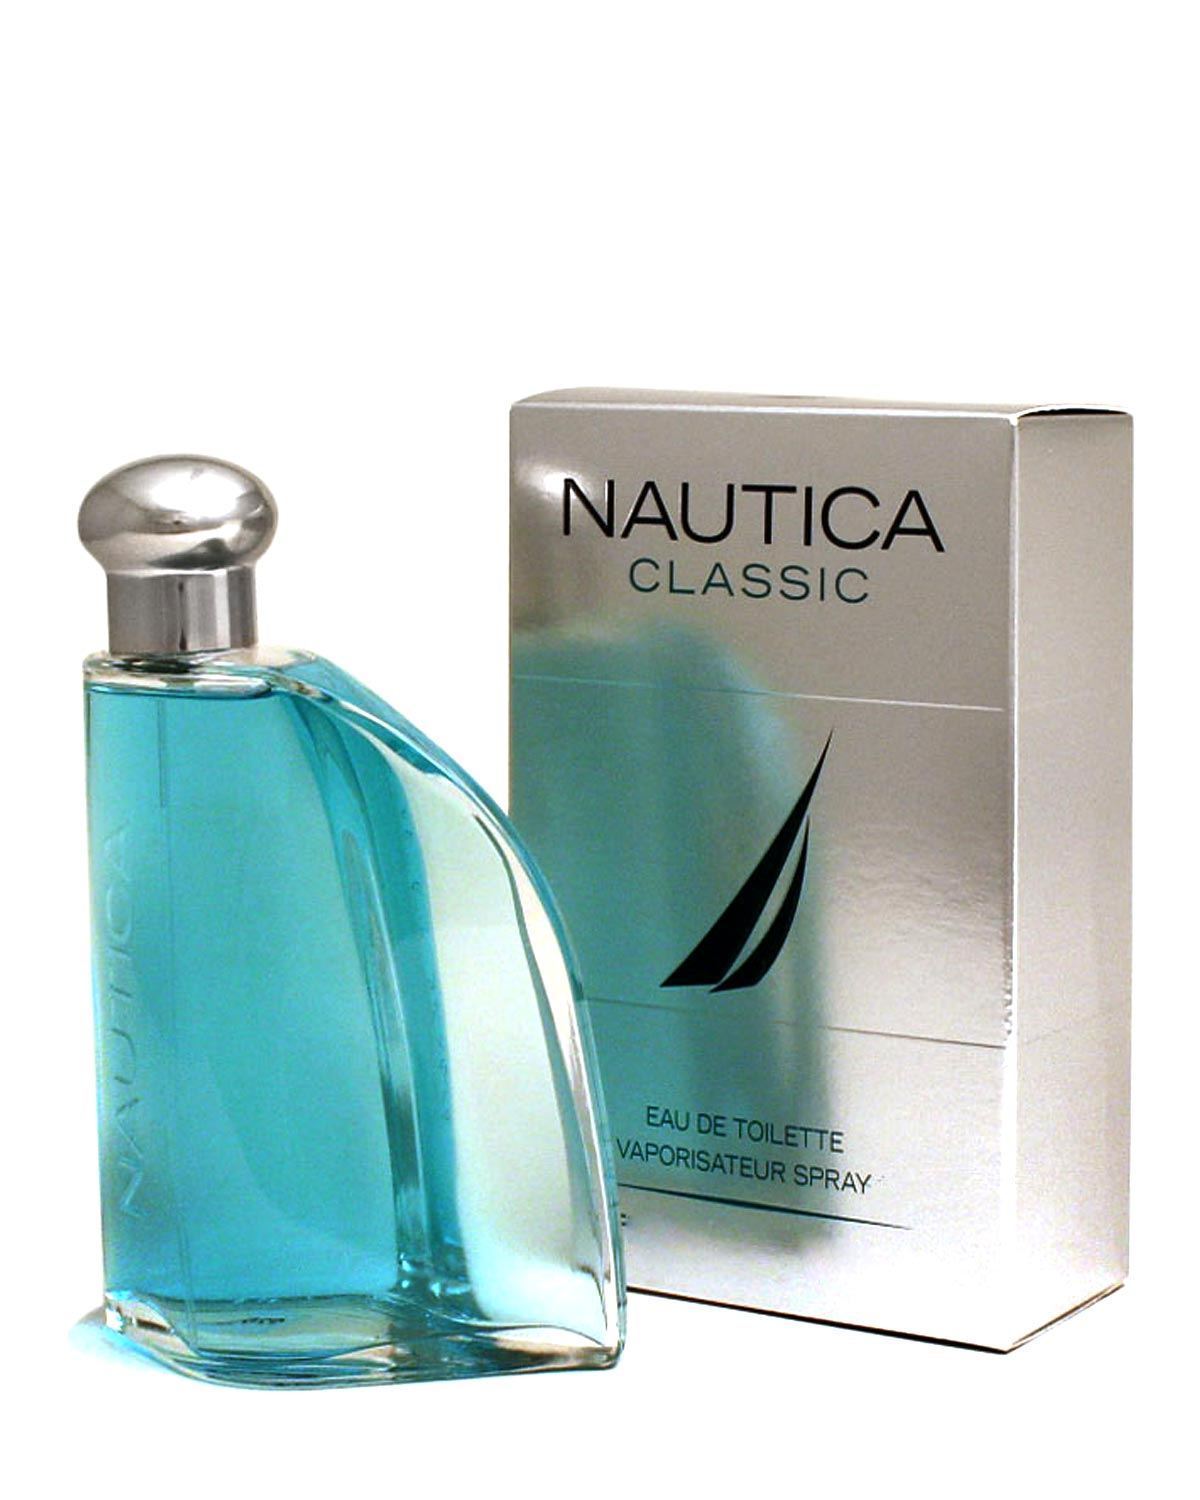 Nautica Classic 3.4 oz Cologne for Men Only $8.79 Shipped!